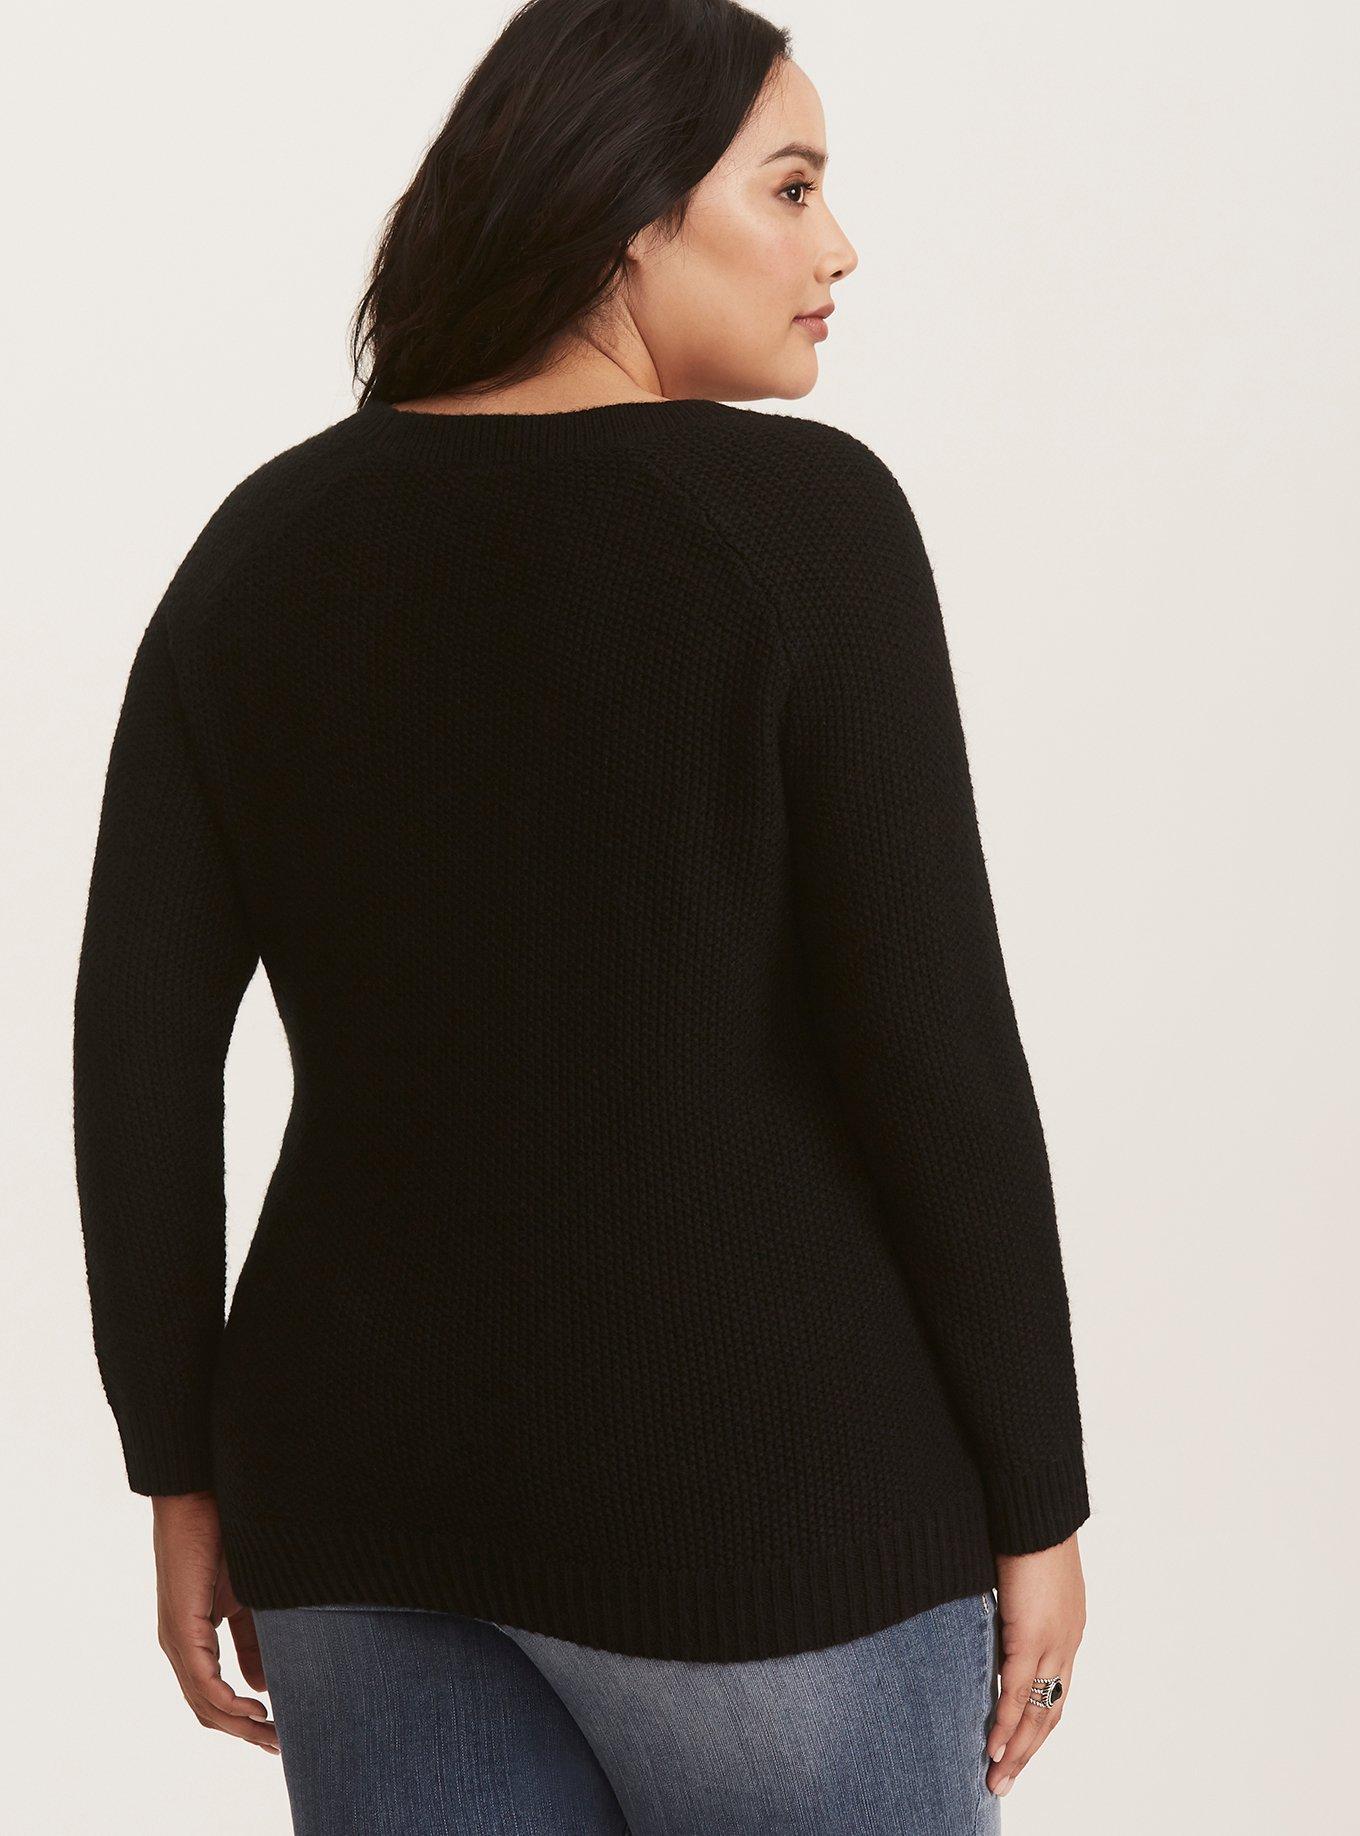 Plus Size - Black Lace-Up Pullover Sweater - Torrid